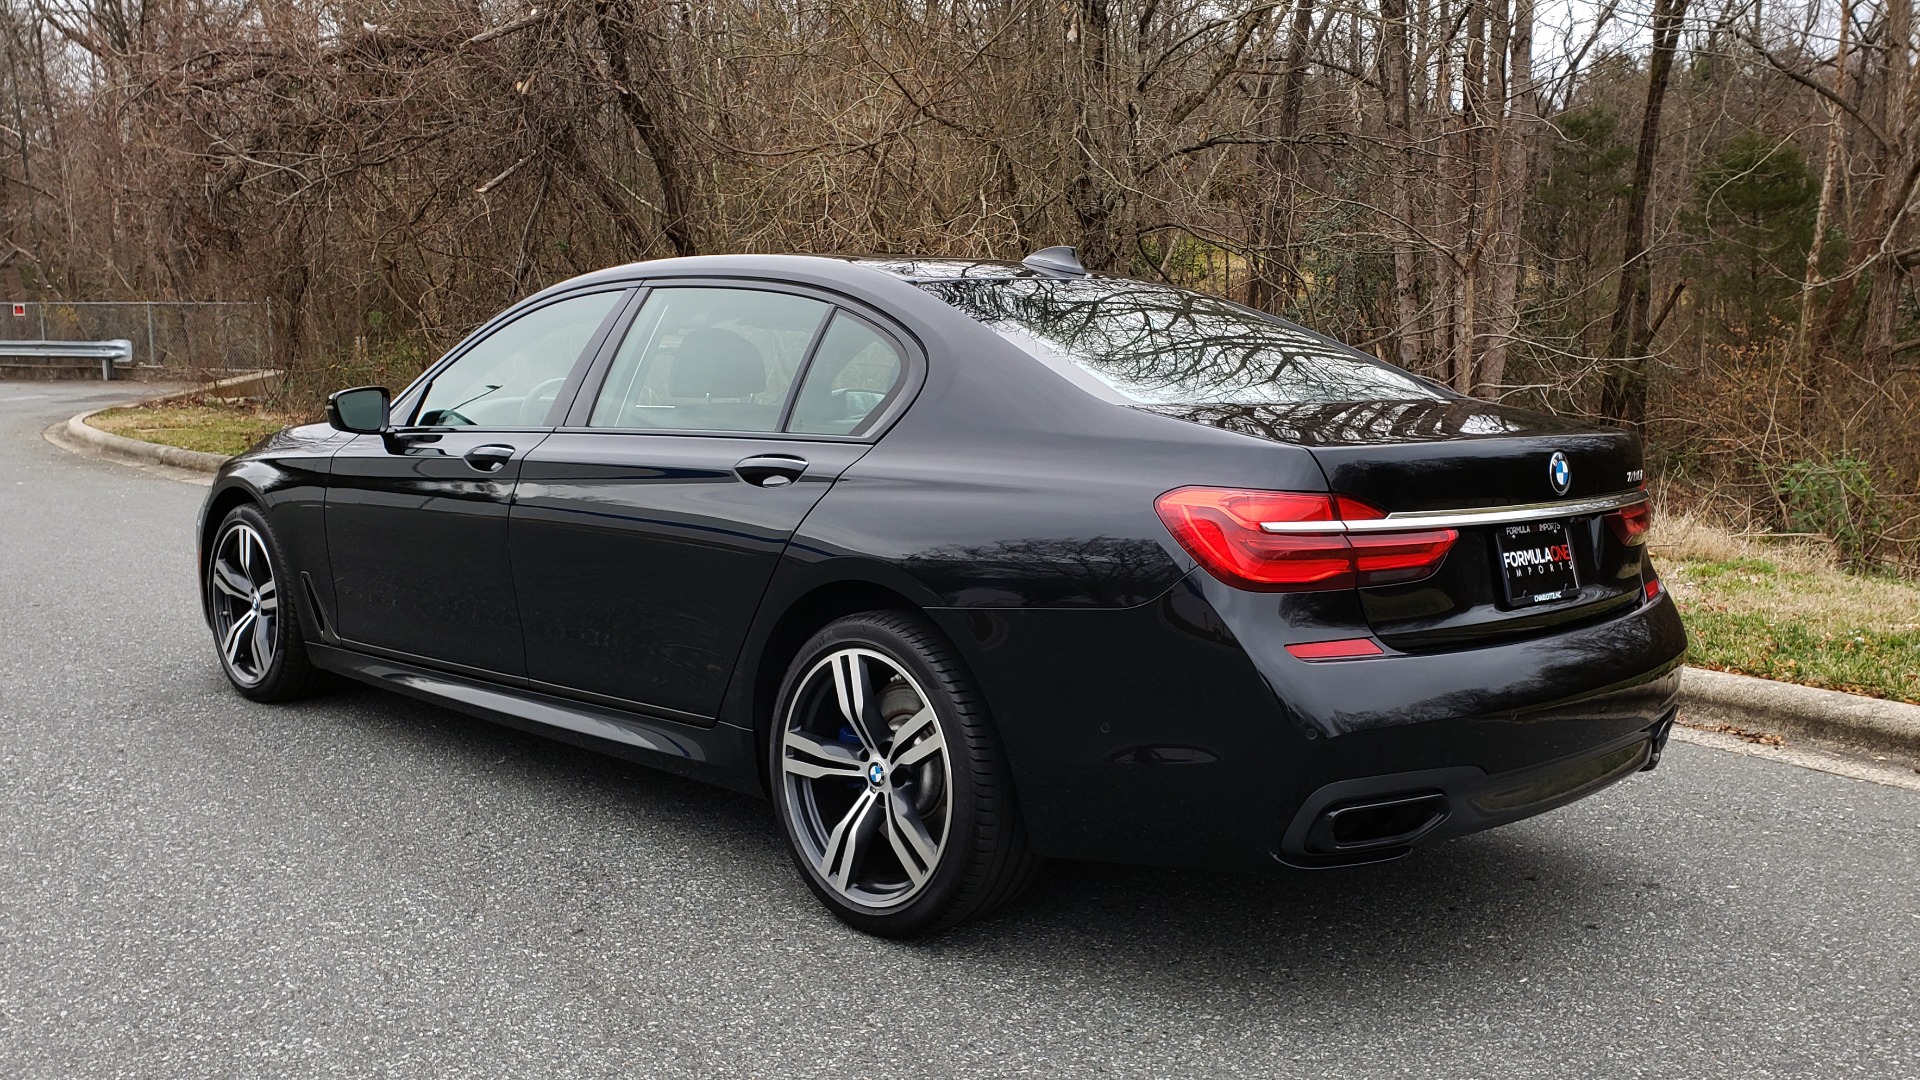 Used 2017 BMW 7 SERIES 750i M-SPORT / AUTOBAHN / EXEC / DRVR ASST PLUS II / CLD WTHR for sale Sold at Formula Imports in Charlotte NC 28227 3